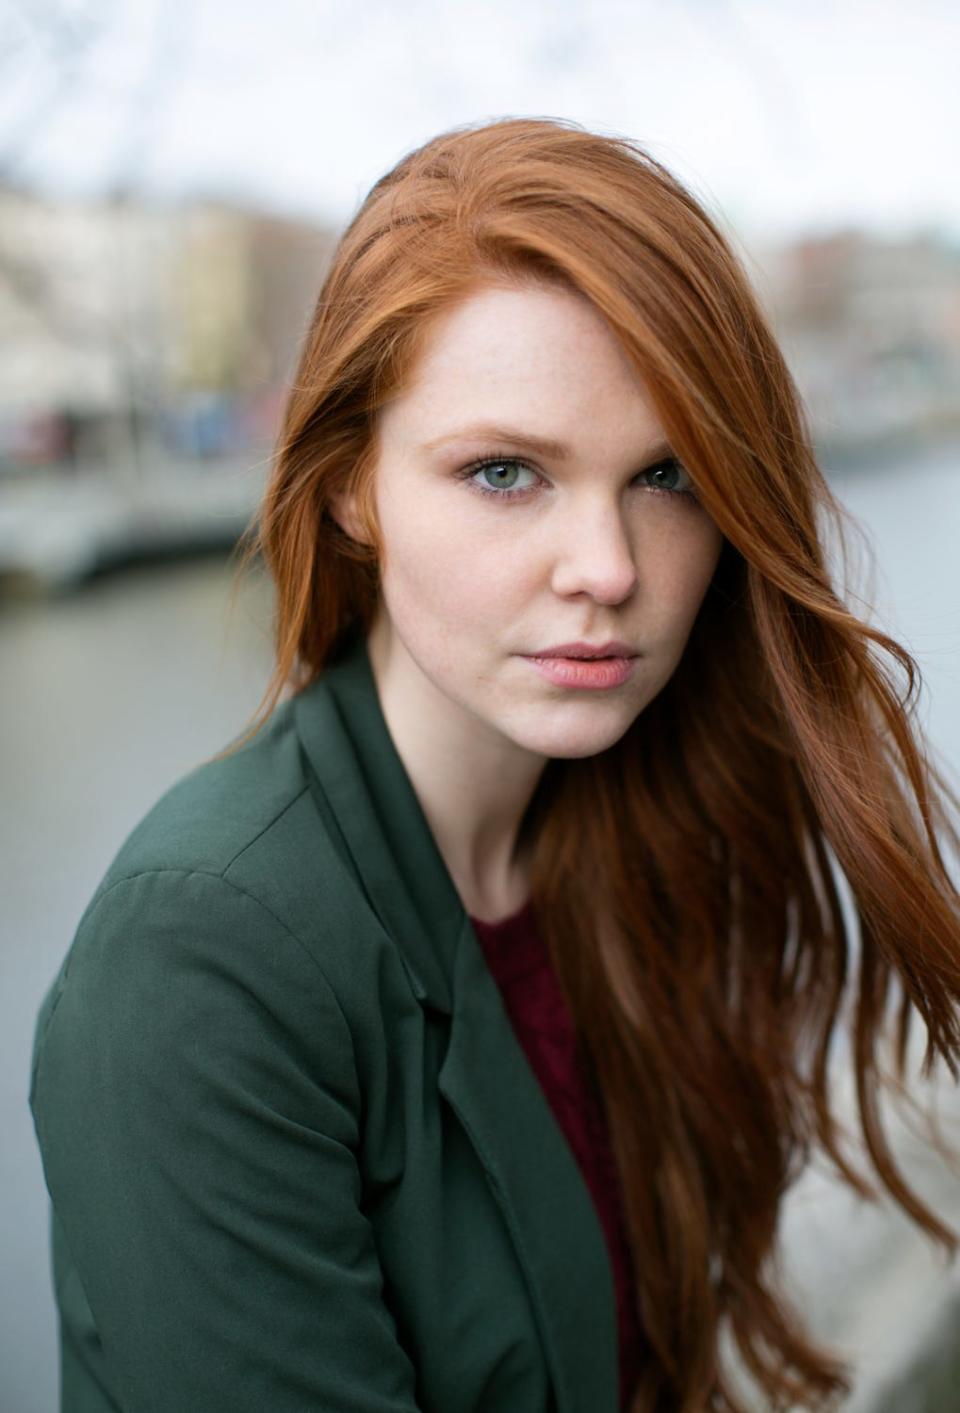 A redhead named Aoife from Longford, Ireland.